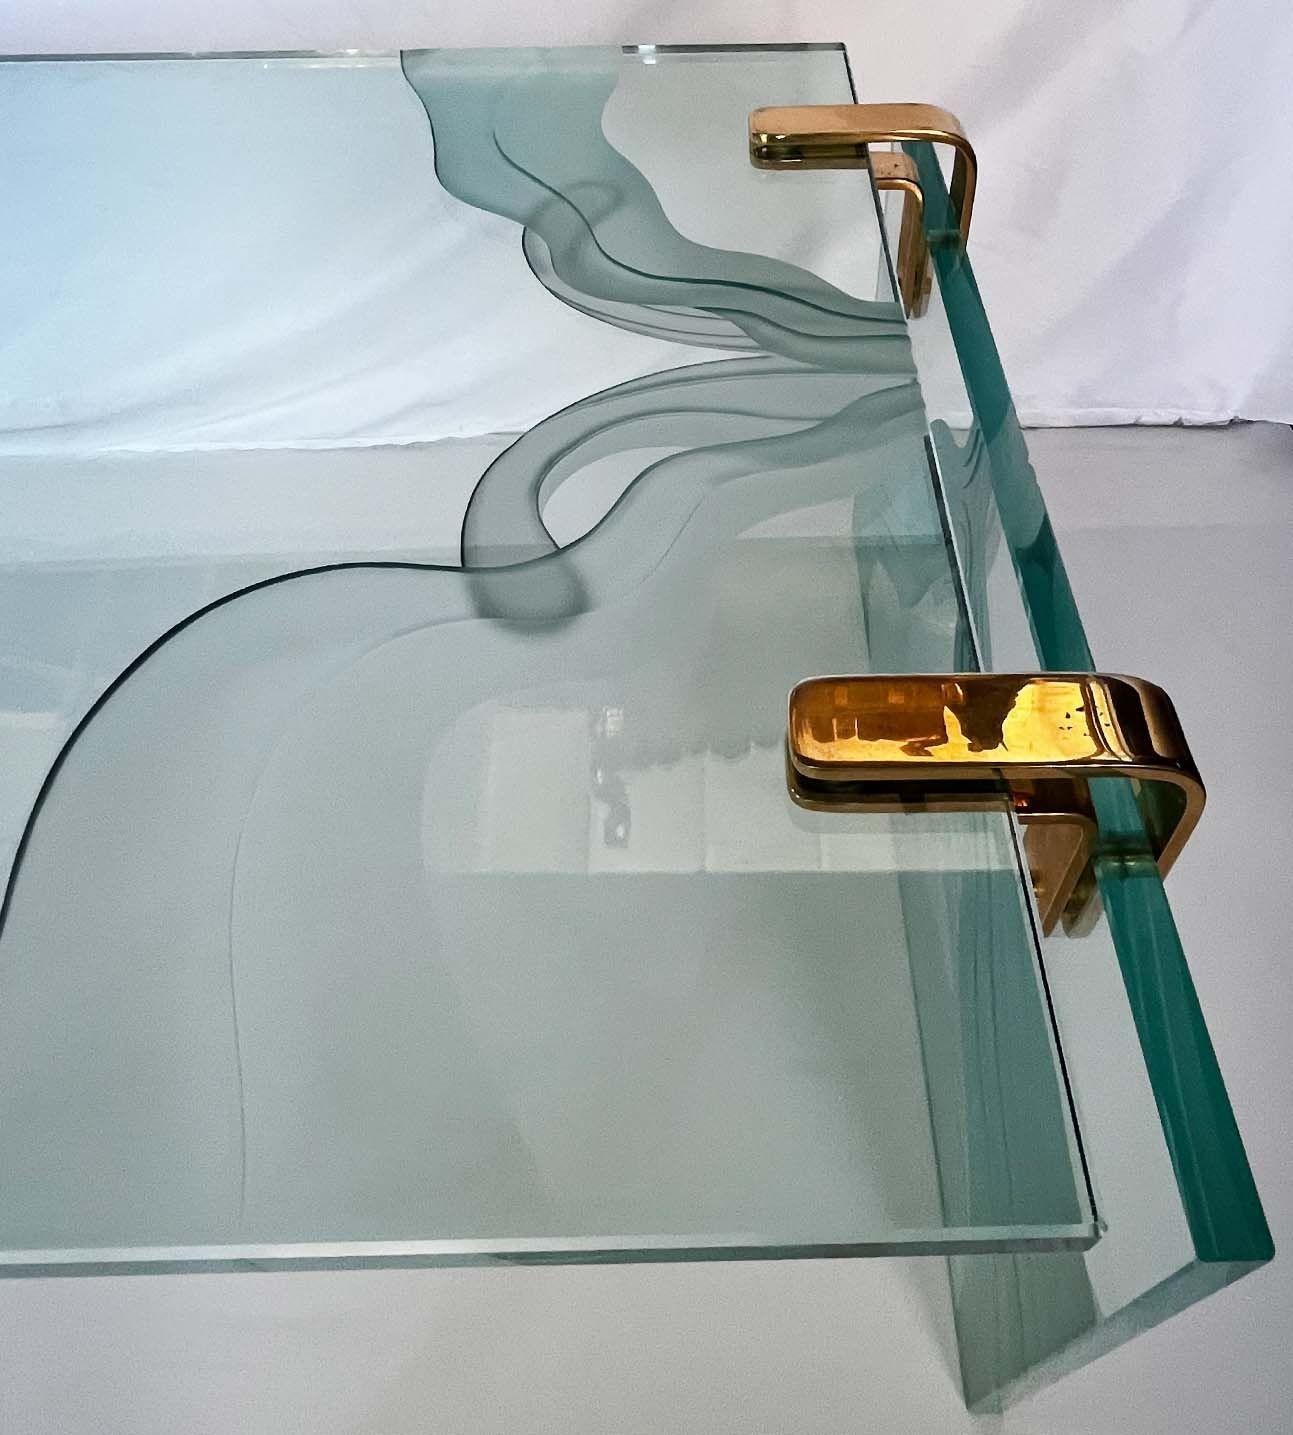 Graceful vintage coffee table in the style of Fontana Arte. Made with thick glass and wave-liked pattern frosted glass details around the piece held in place with brass hardware. 
Made in Italy, c. 1960's.
Dimensions:
17